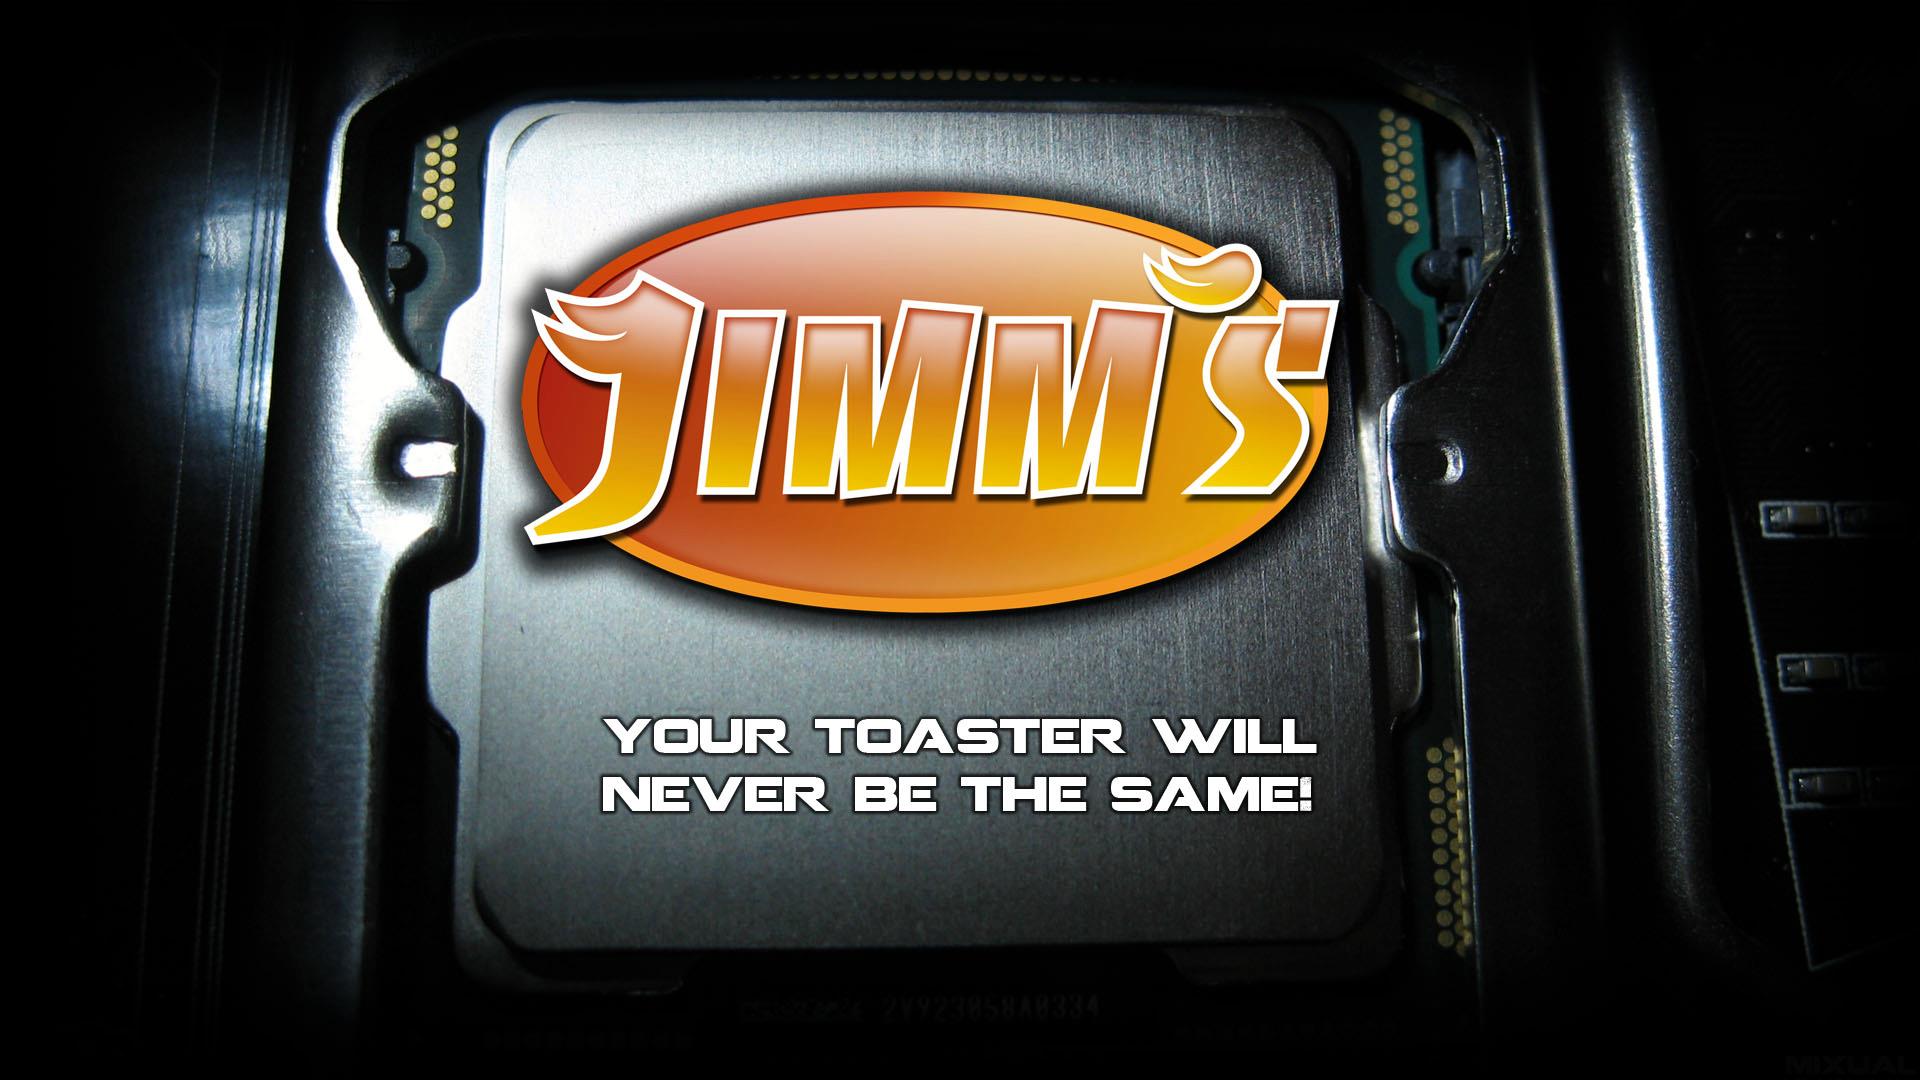 “Your toaster will never be the same”